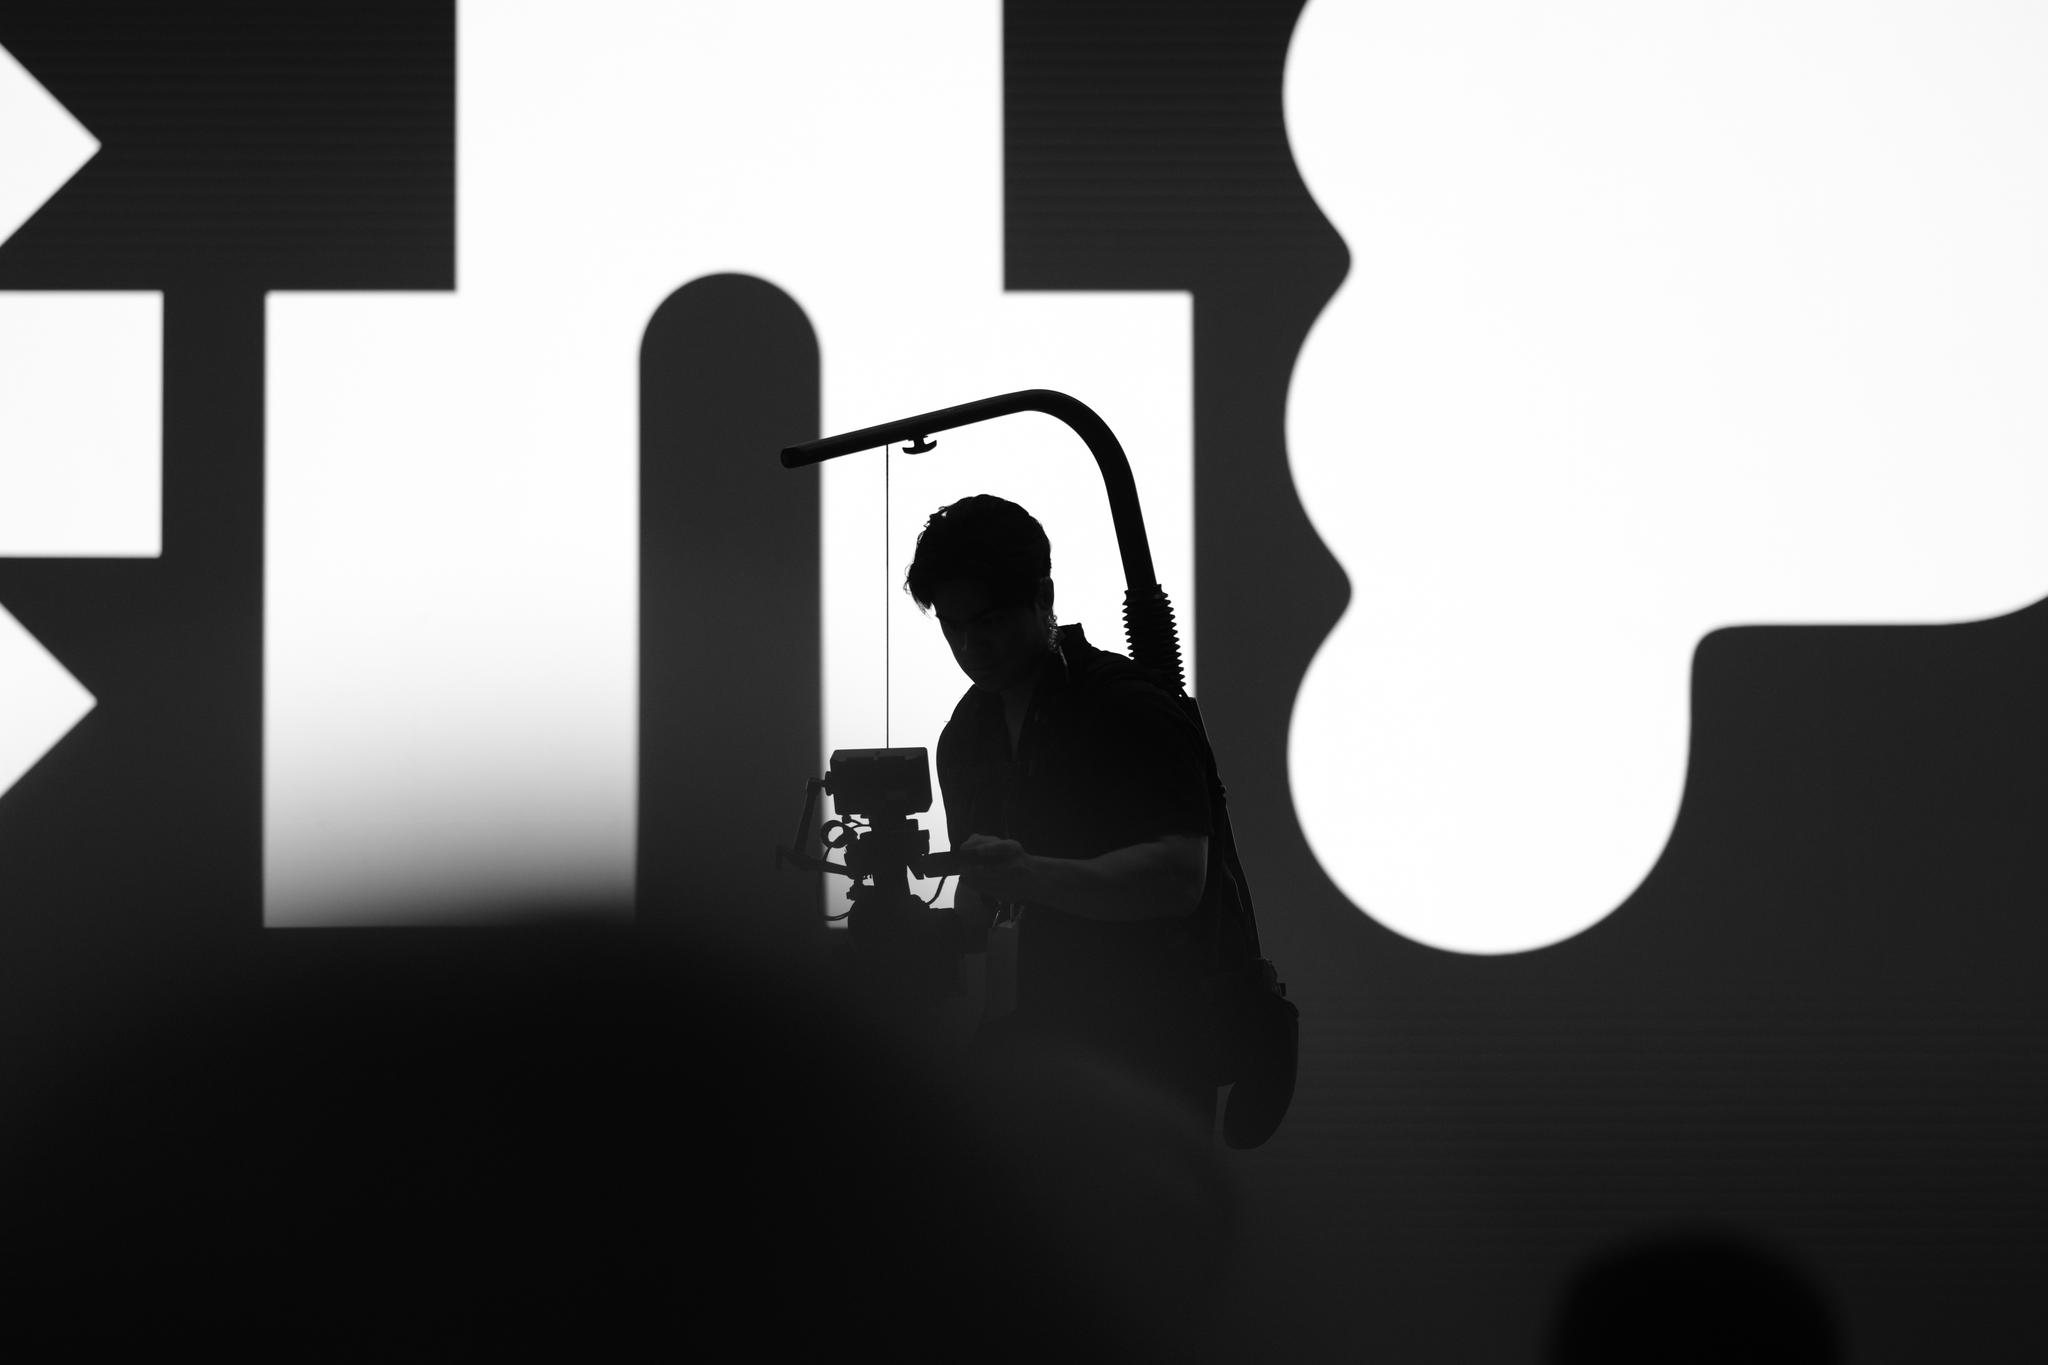 A silhouette of a person operating a camera against a backdrop of abstract black and white shapes